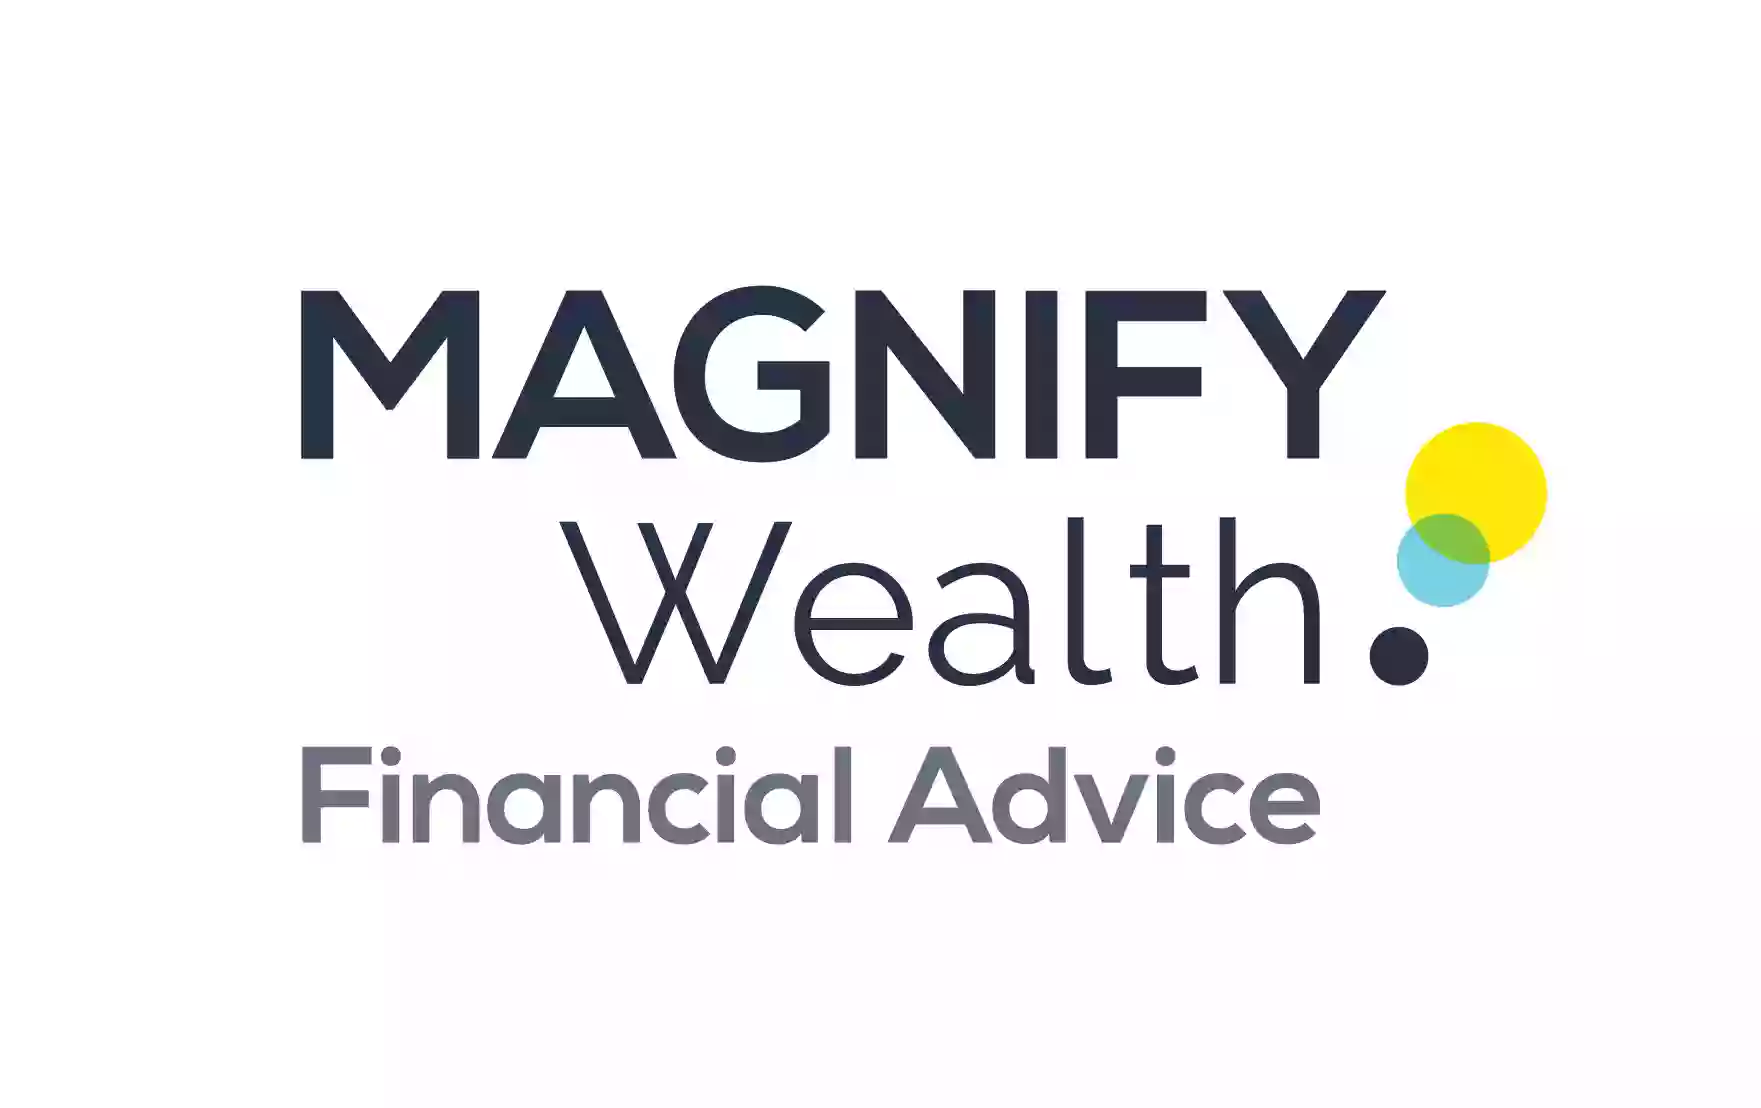 Magnify Wealth